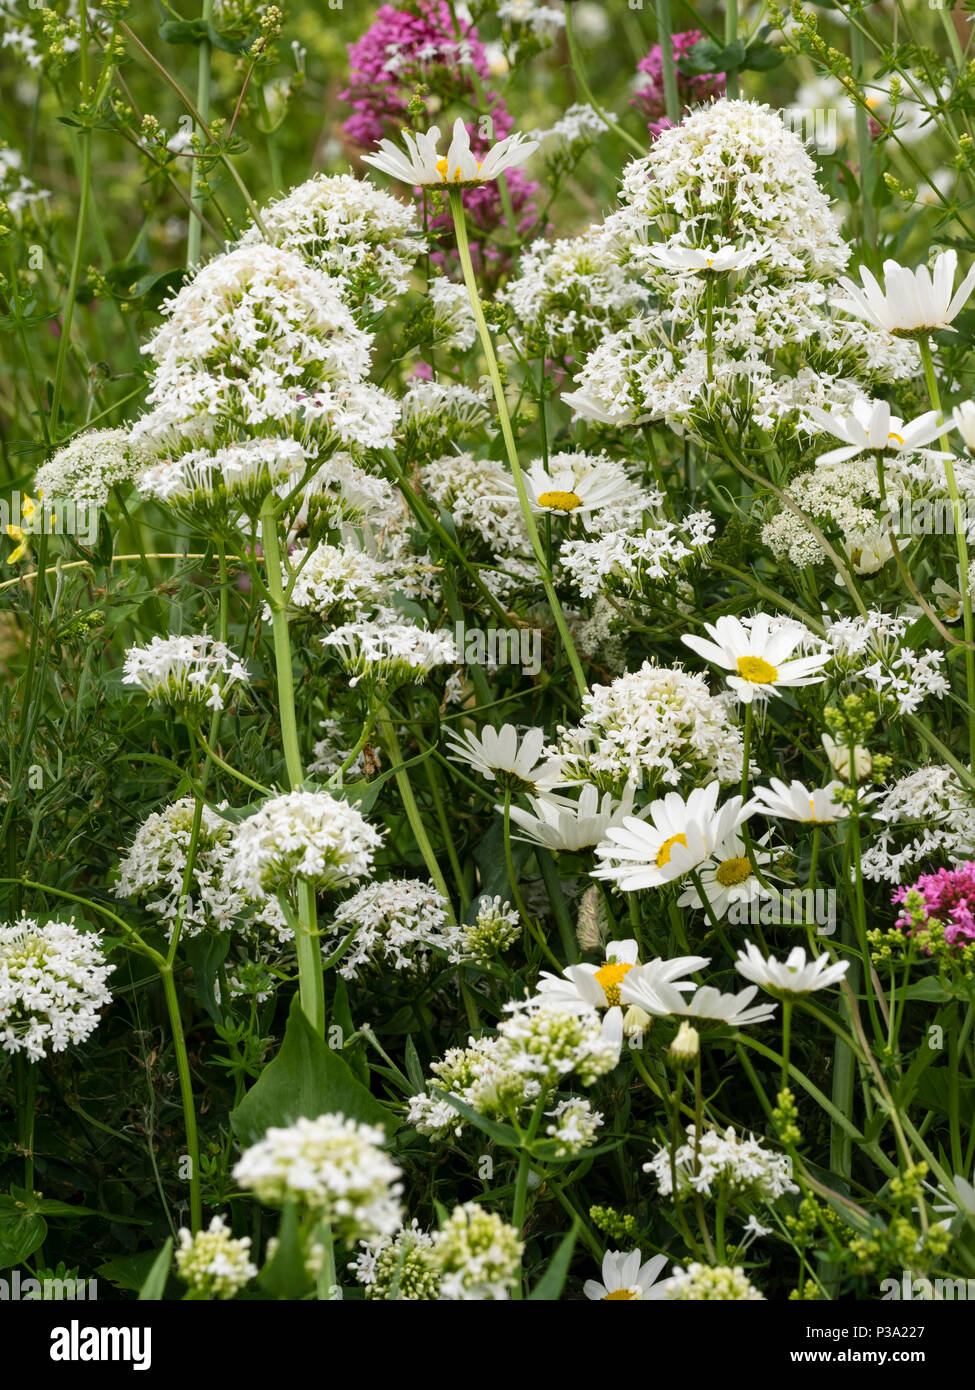 White form of red valerian, Centranthus ruber, and ox-eye daisies, Leucanthemum vulgare, in a rough grass meadow bank Stock Photo